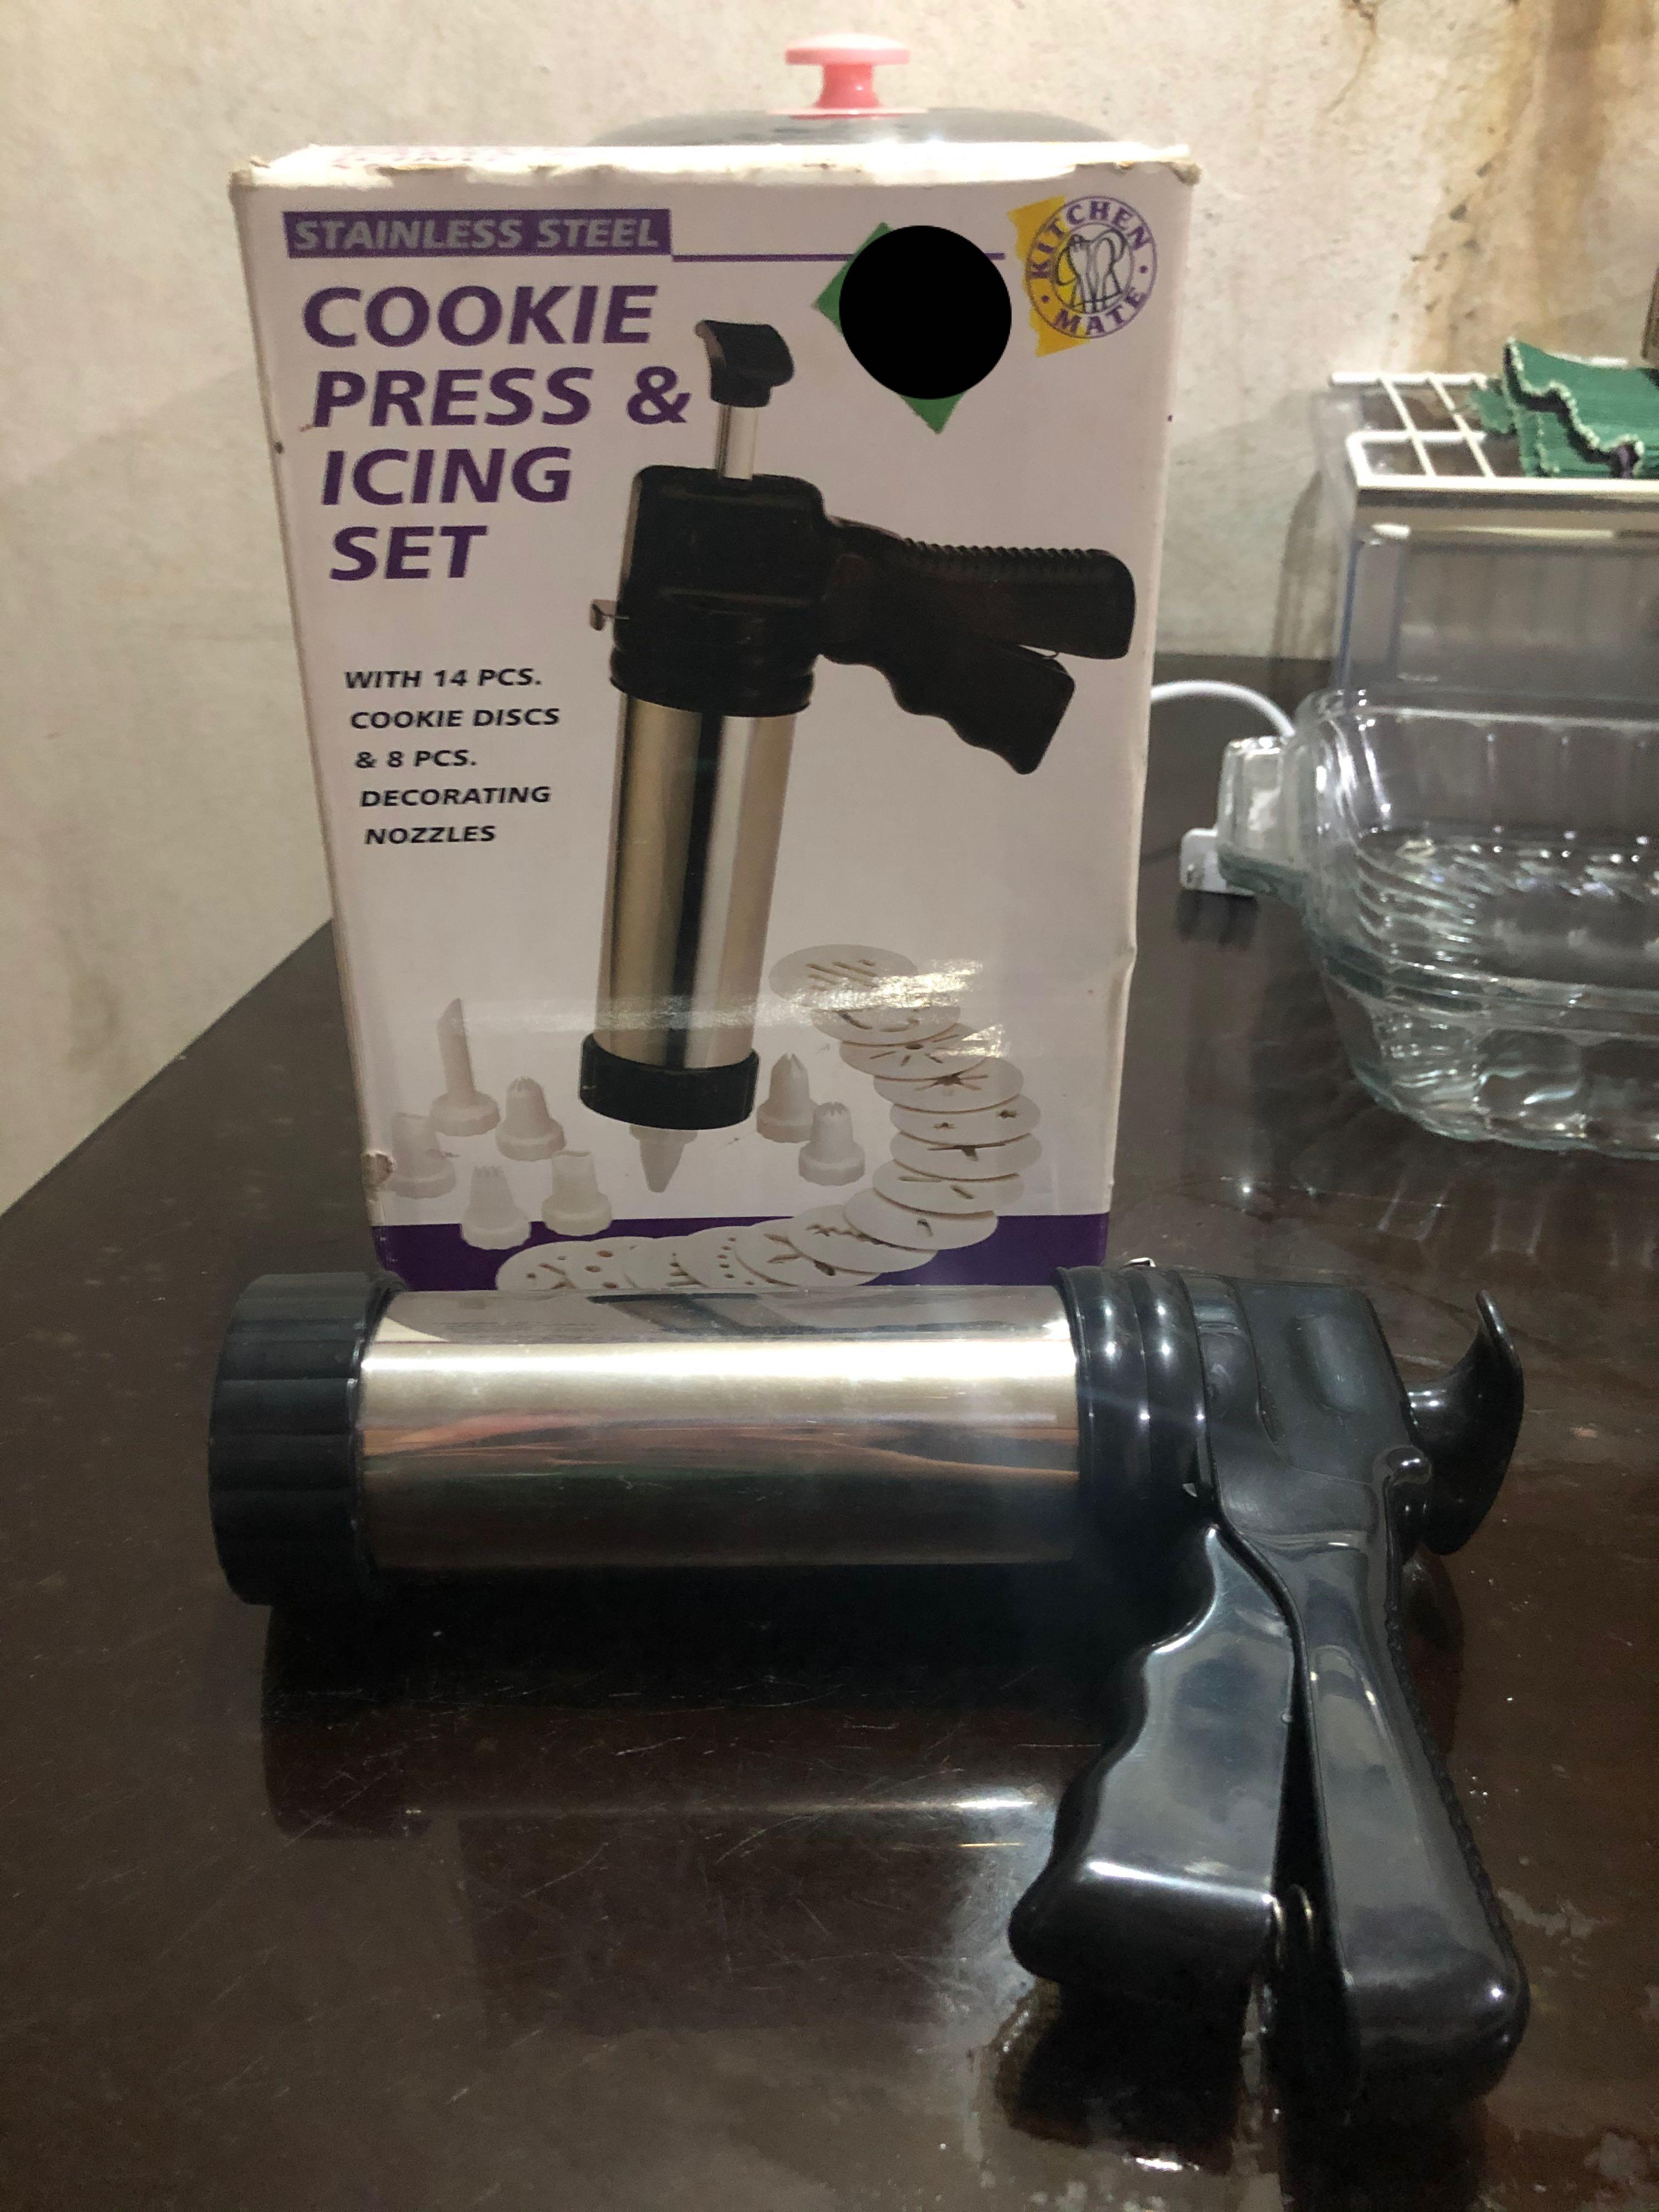 Biscuit Machine Cookie Maker Icing Cookie Press Set with Stamp and Nozzles Home Bakery Baking Tool